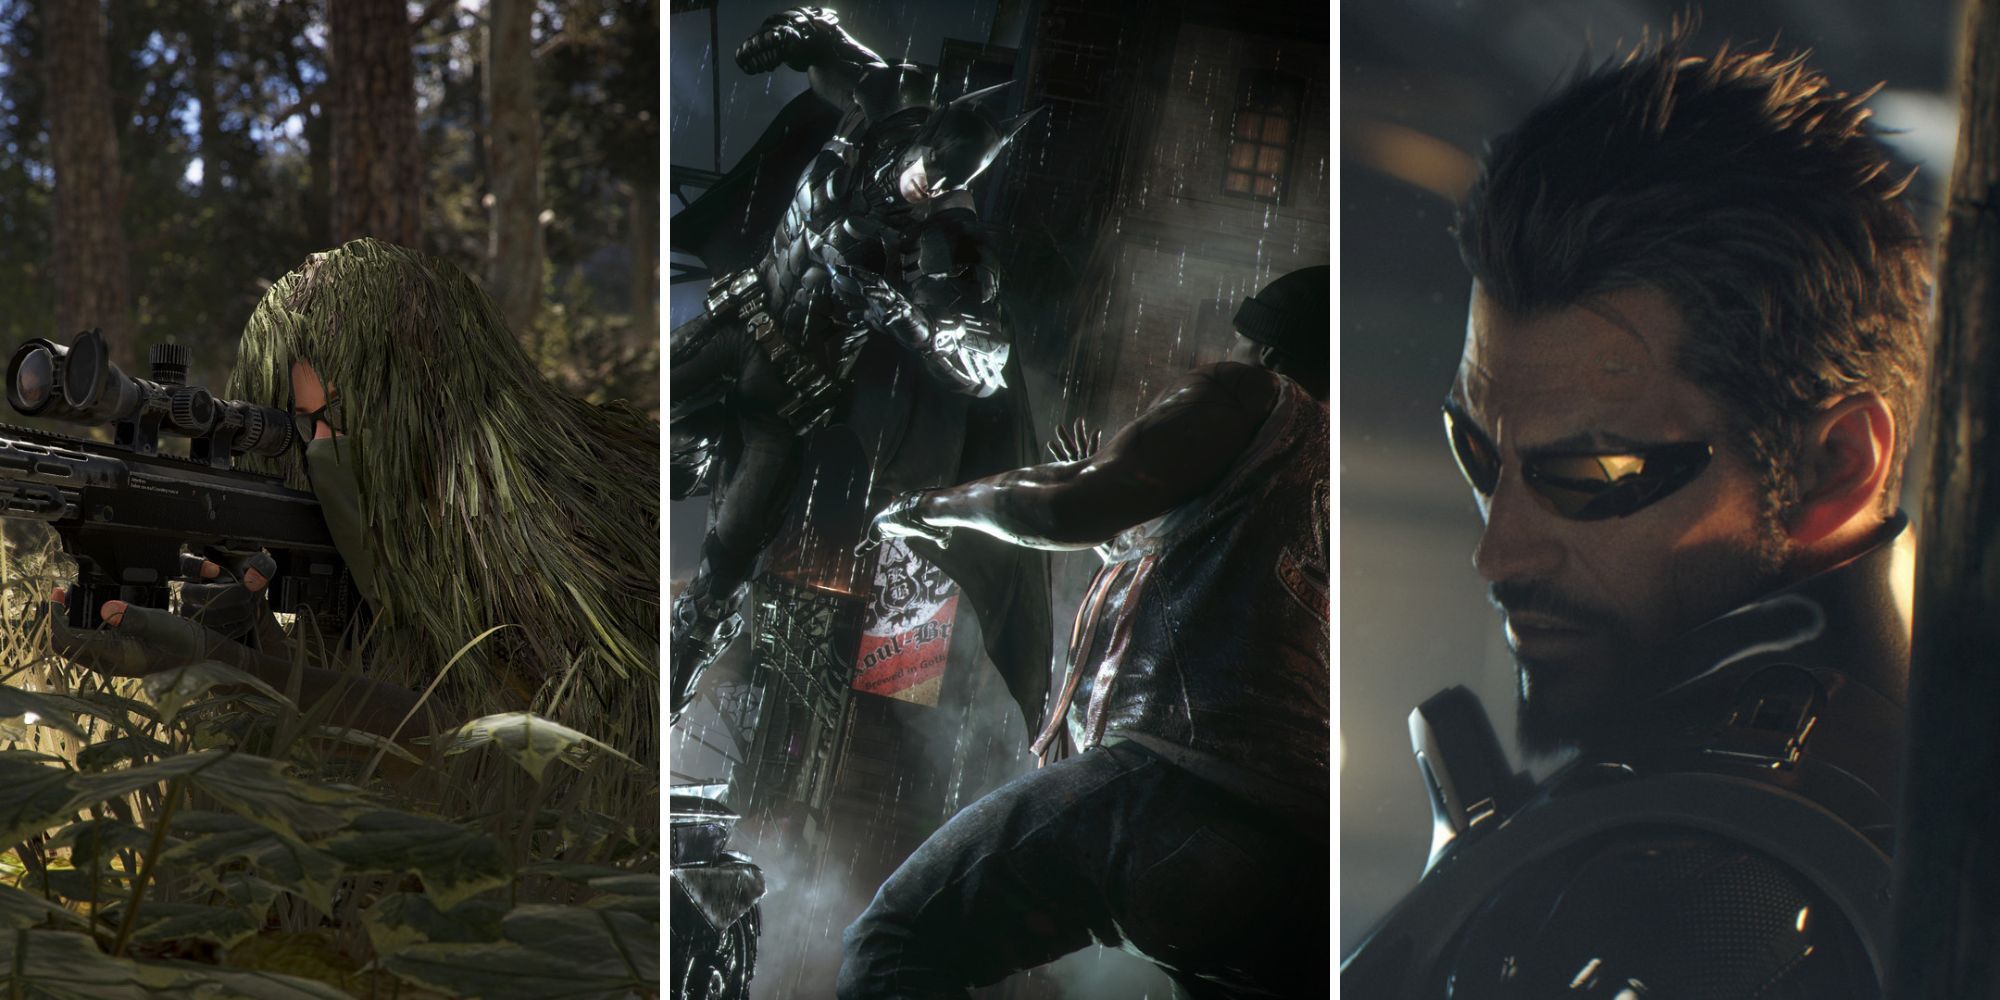 A grid of open-world stealth games showing Tom Clancy's Ghost Recon Wildlands, Batman: Arkham Knight, and Dues Ex: Humans Divided